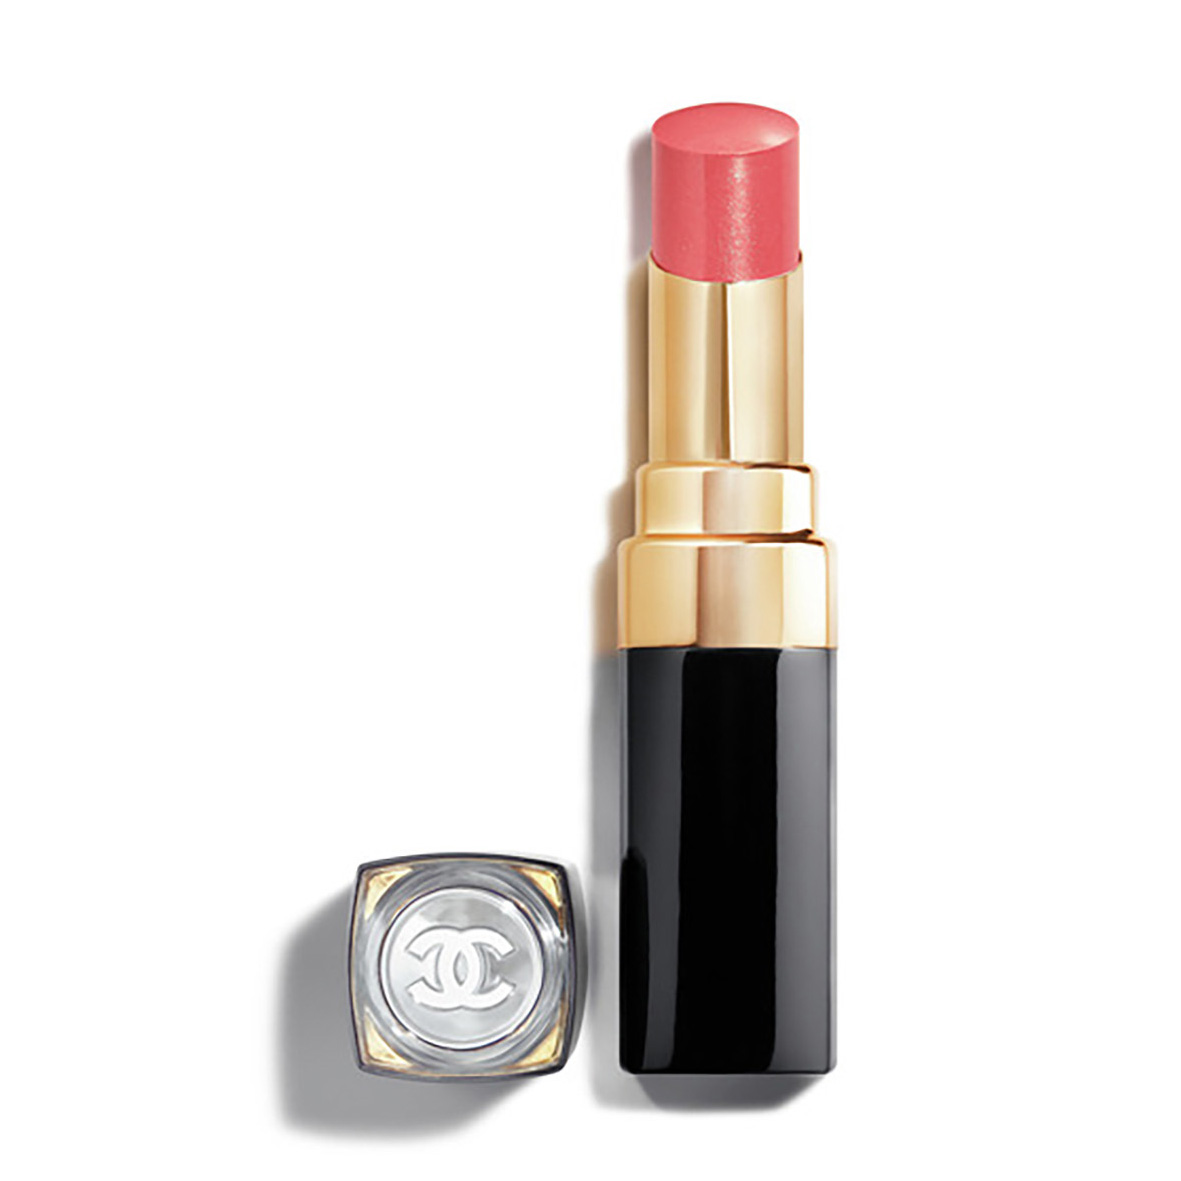 Everything from the CHANEL Les Beiges Summer Light makeup collection ...